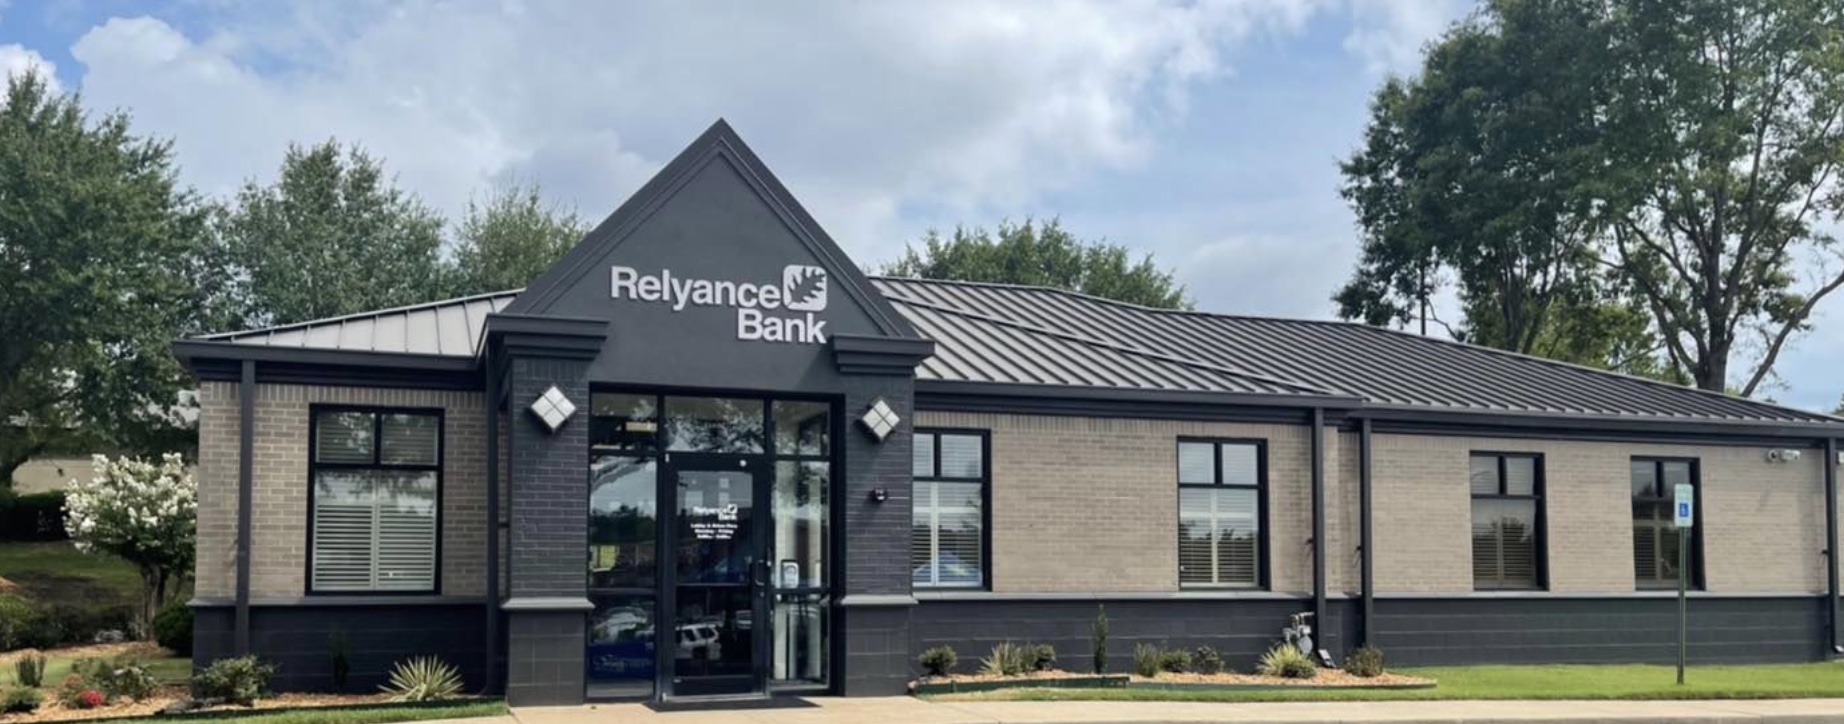 Relyance Bank's newly opened location at 16600 Chenal Parkway in Little Rock.